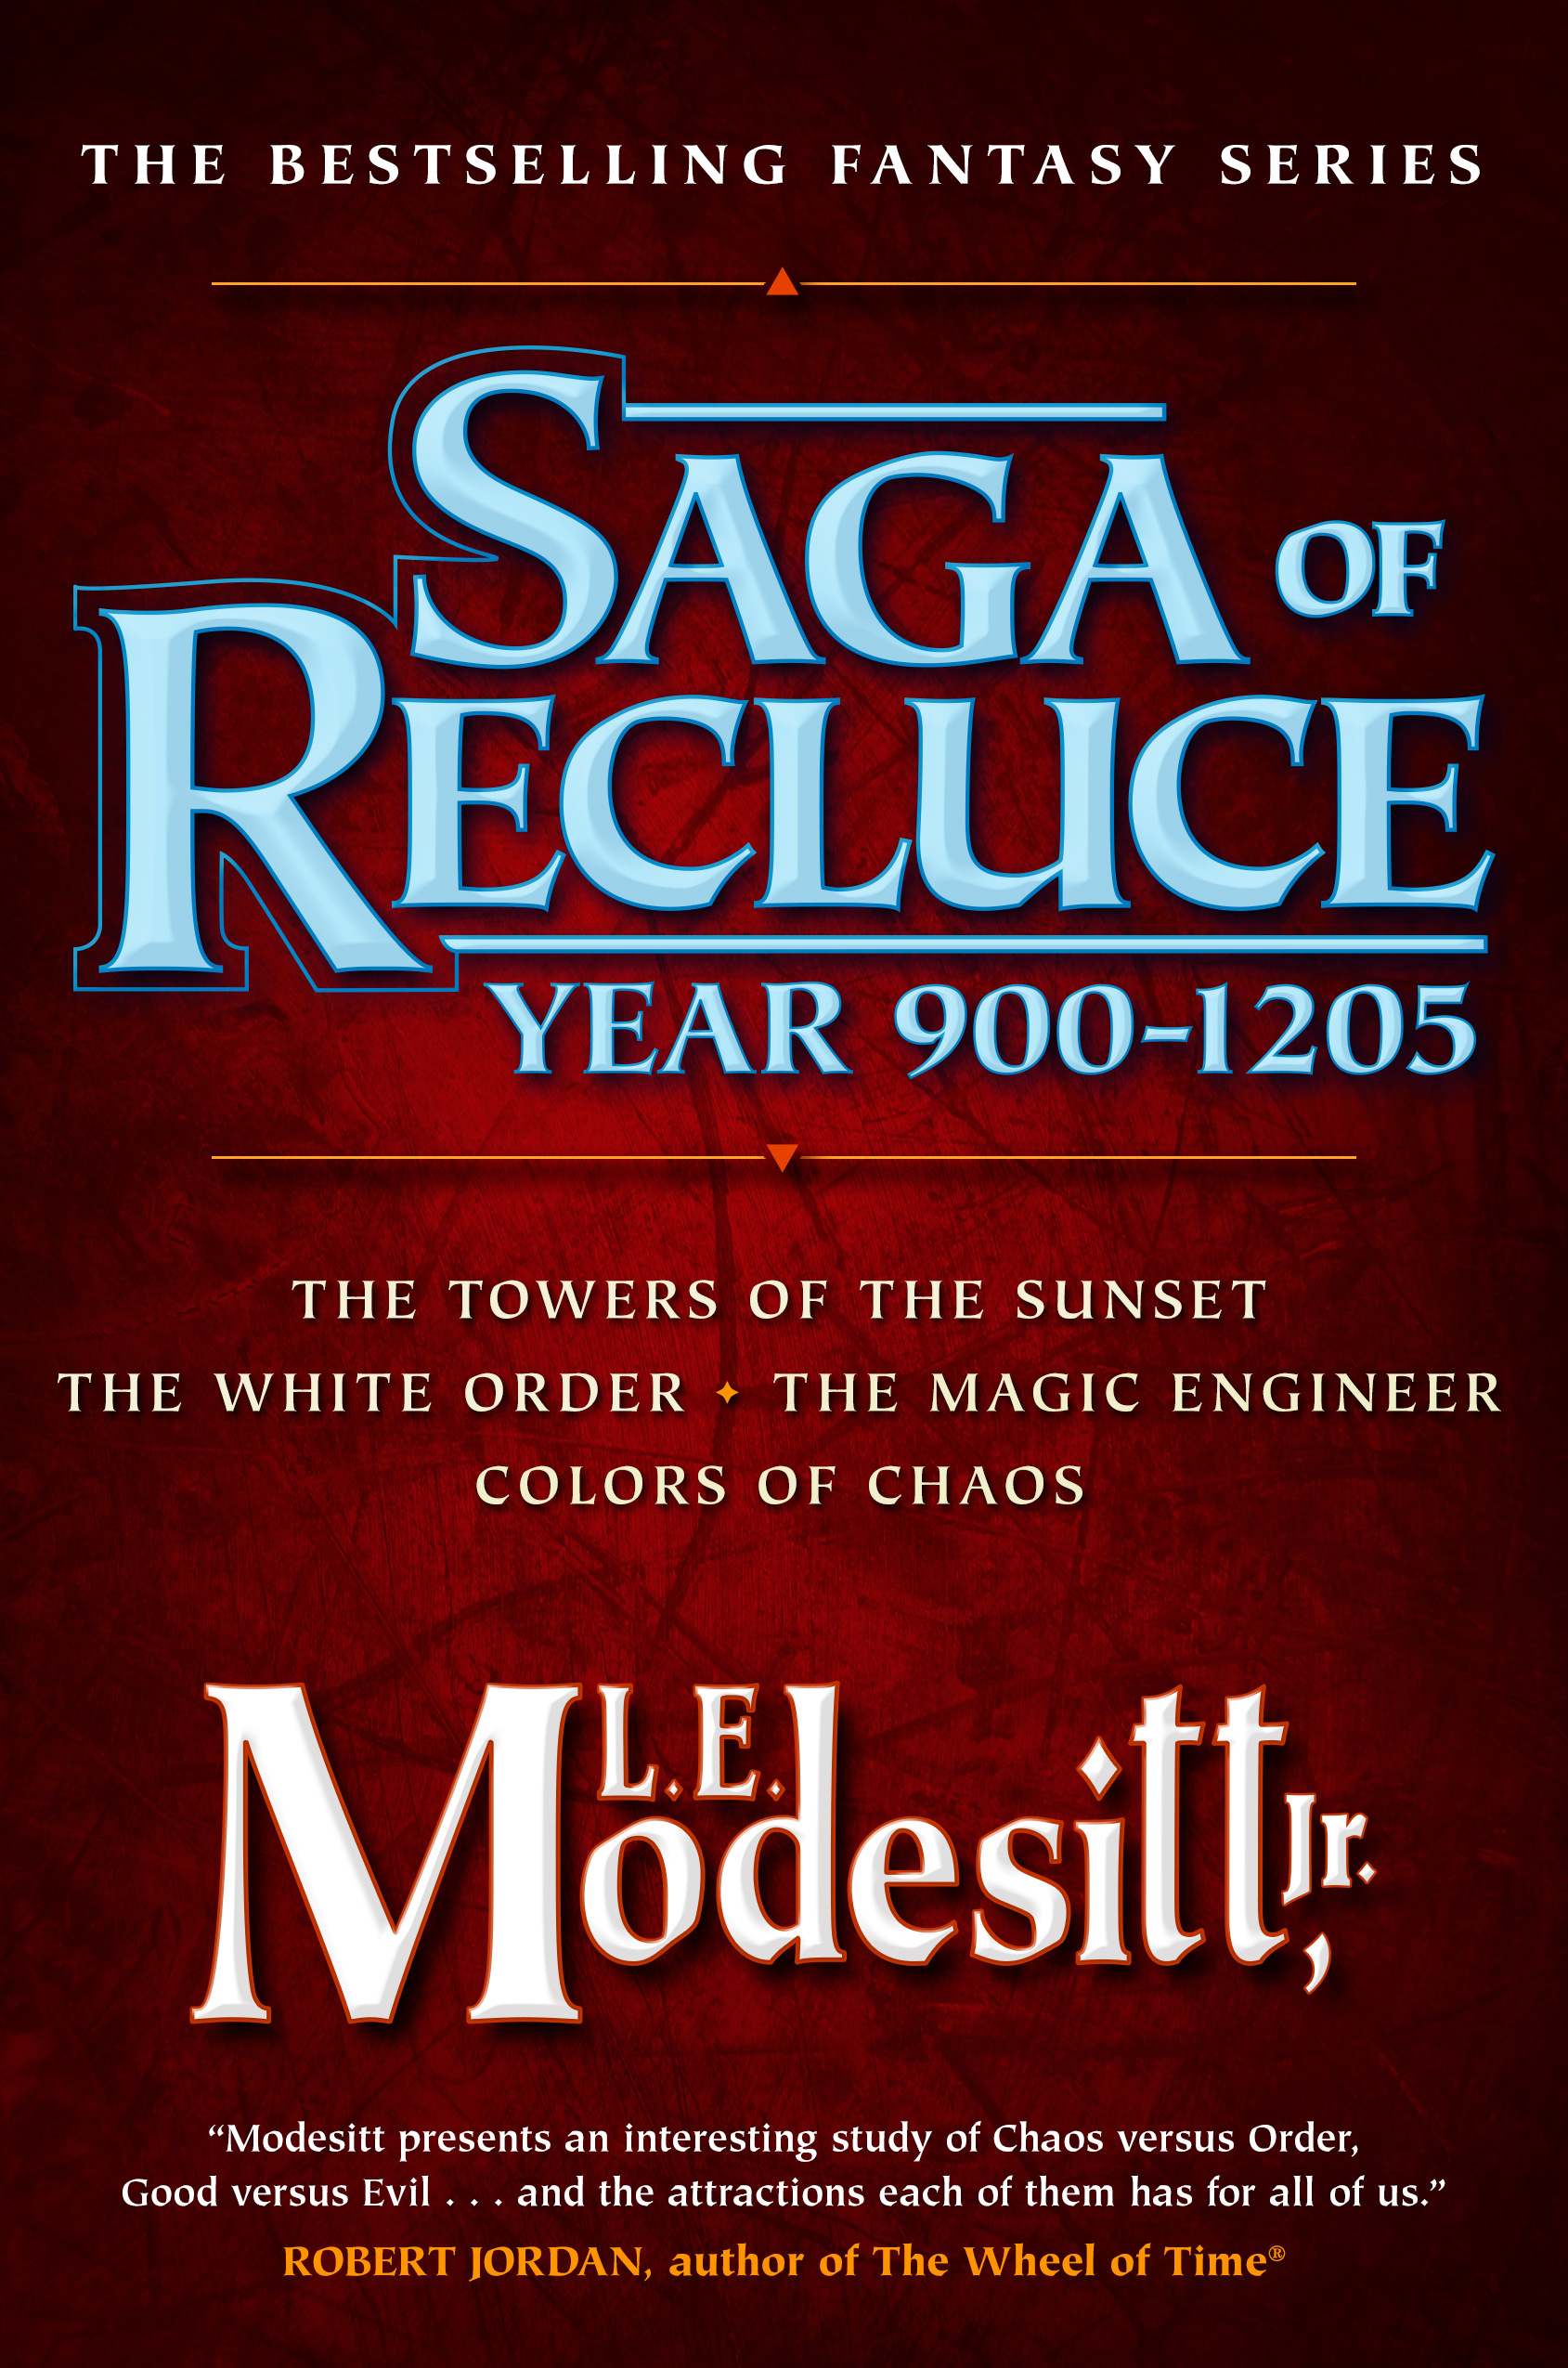 Saga of Recluce, Year 900-1205 : (The Towers of the Sunset, The White Order, The Magic Engineer, Colors of Chaos) by L. E. Modesitt, Jr.